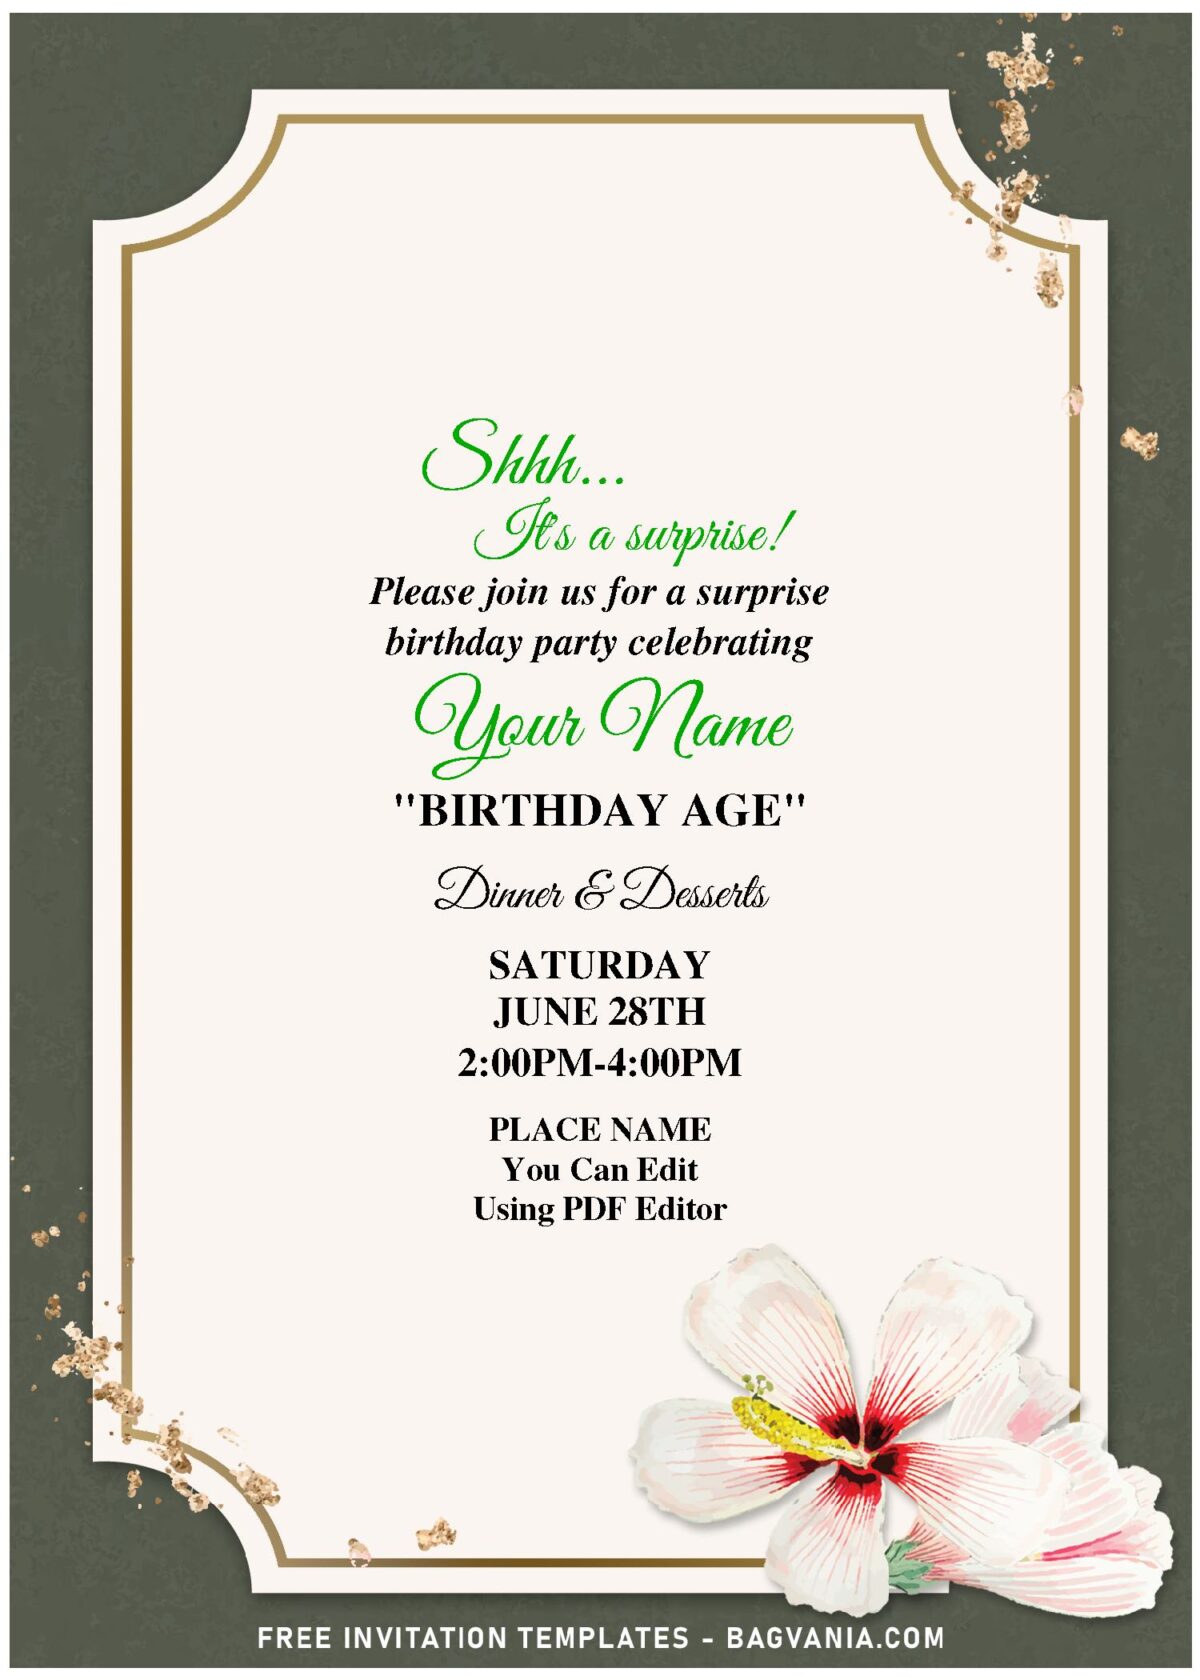 (Free Editable PDF) Lovely Floral Frame Birthday Invitation Templates with enchanting lily and anemone